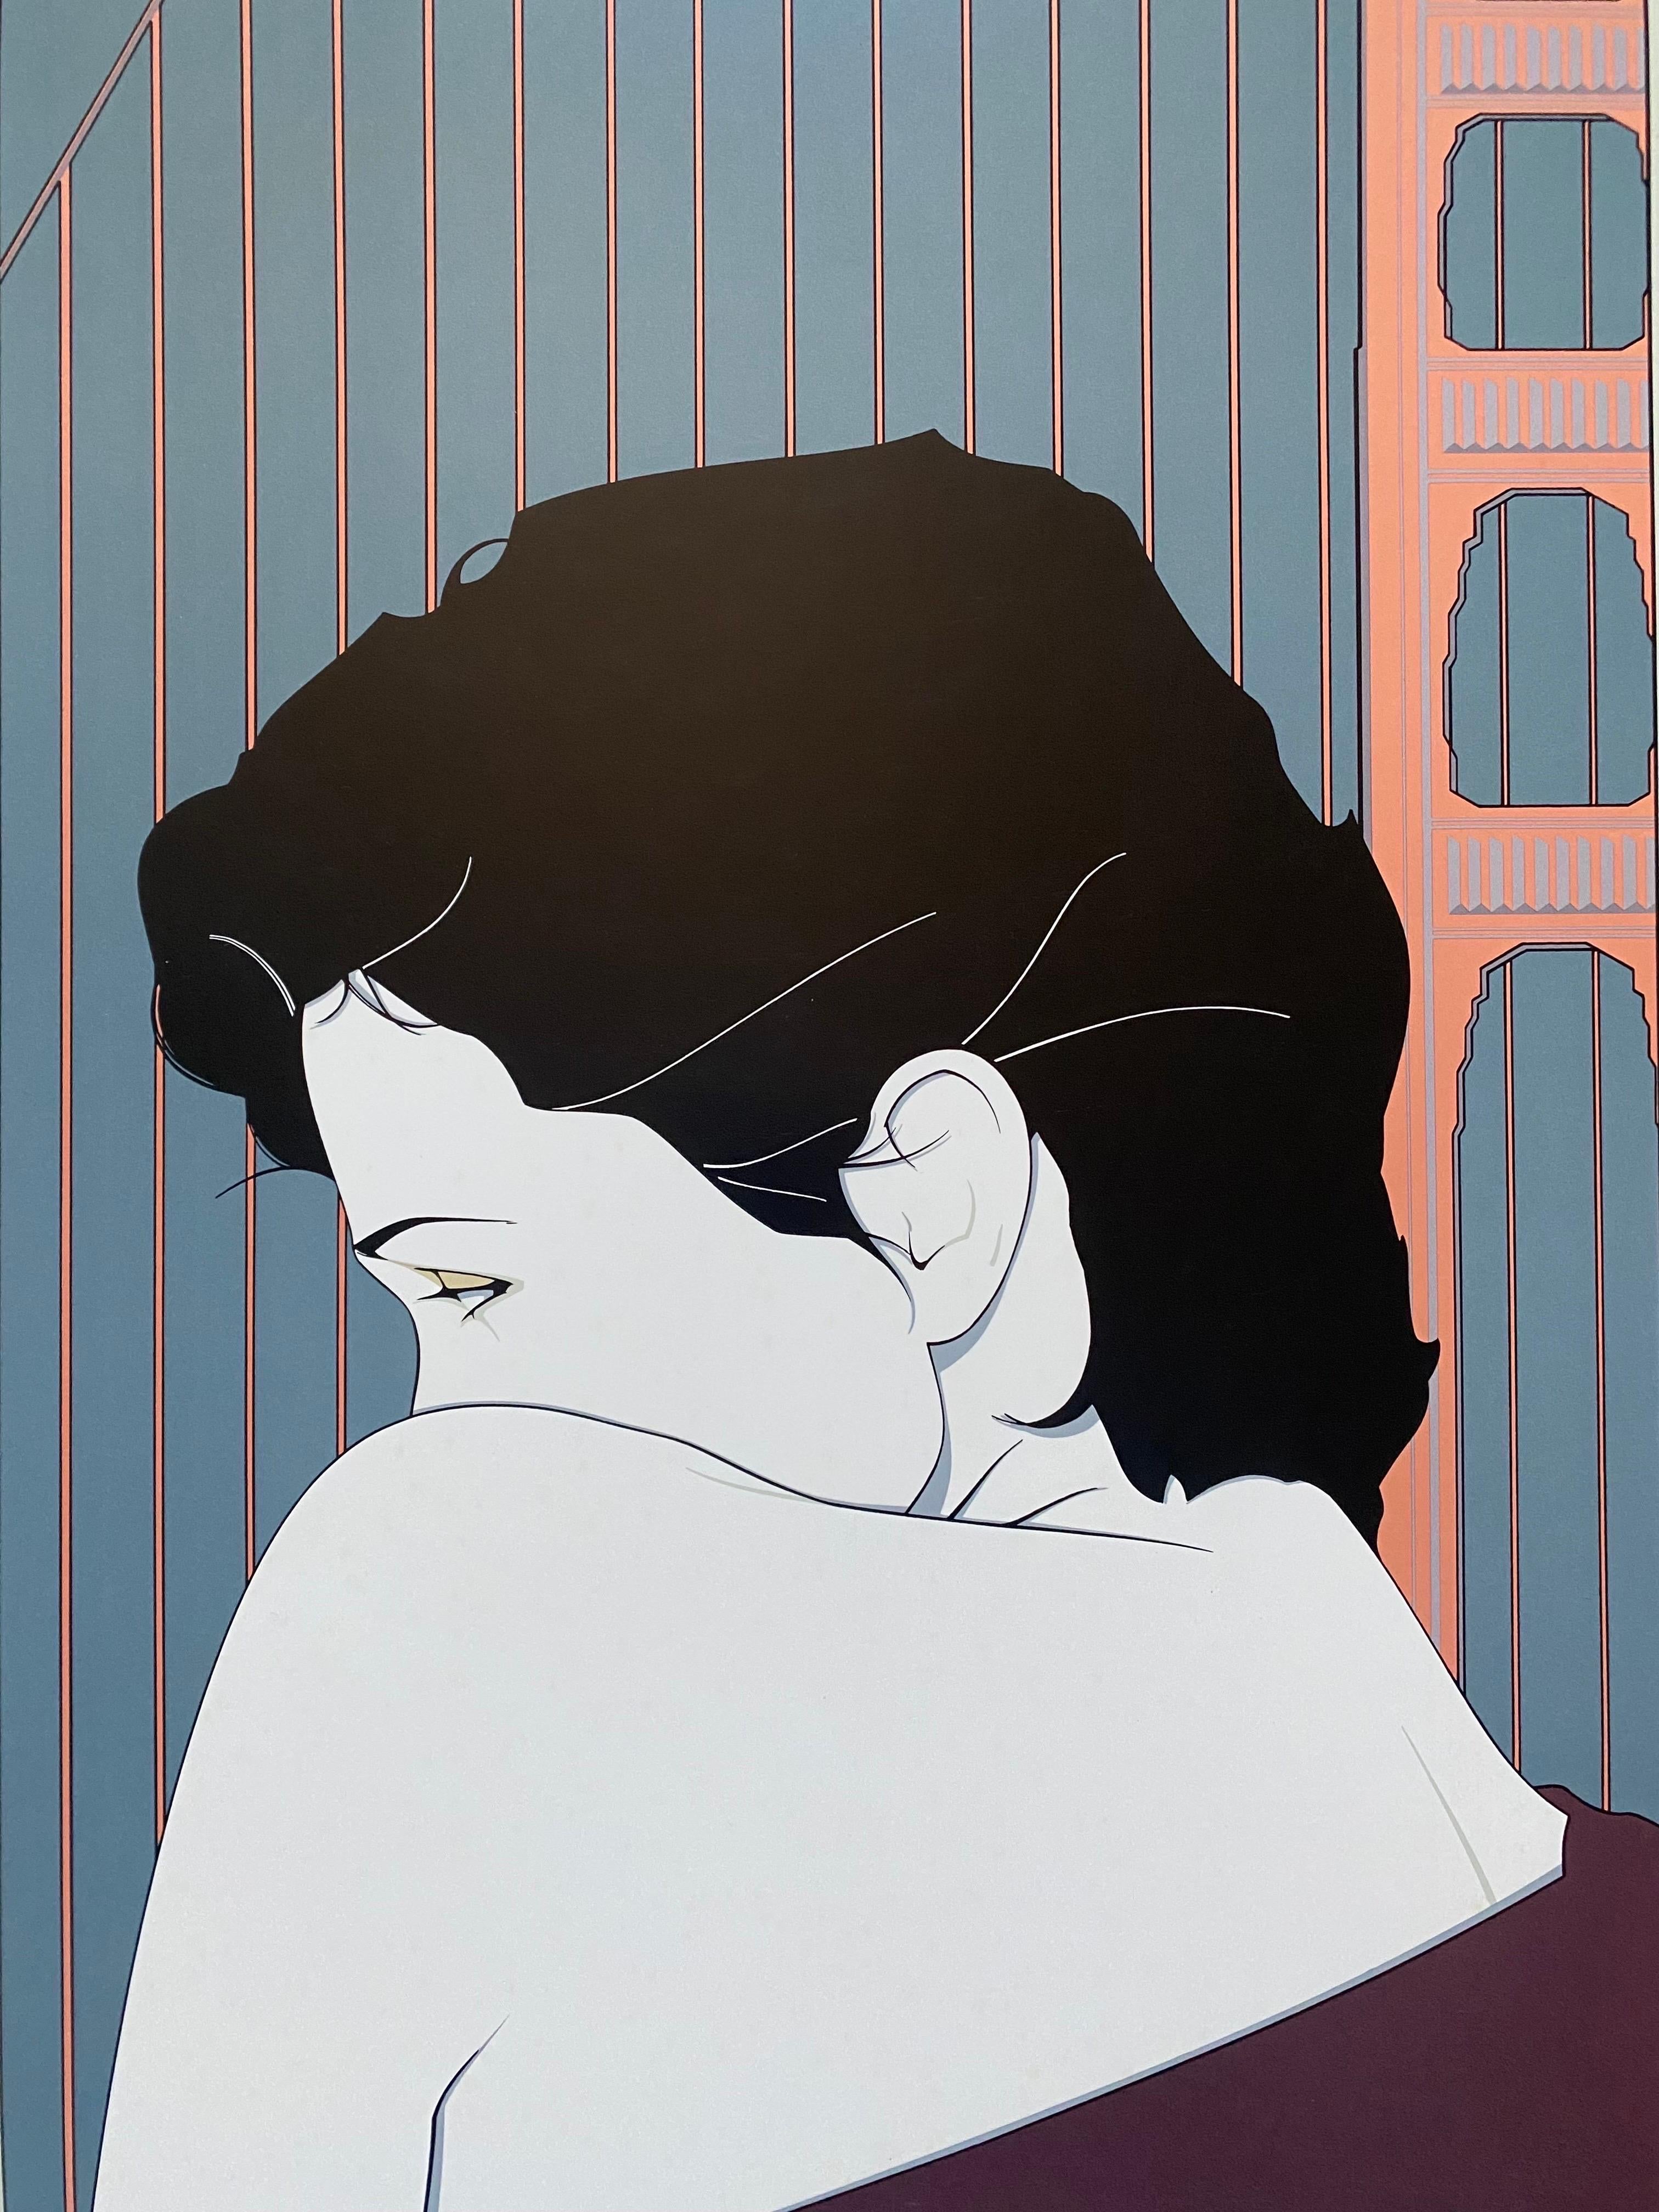 Gorgeous Patrick Nagel Screen-print of a woman in front of the Golden Gate Bridge. Produced in 1981 by Mirage Editions for Showplace Square Gallery in San Francisco, California. 

This print is in overall in very good condition, but comes with